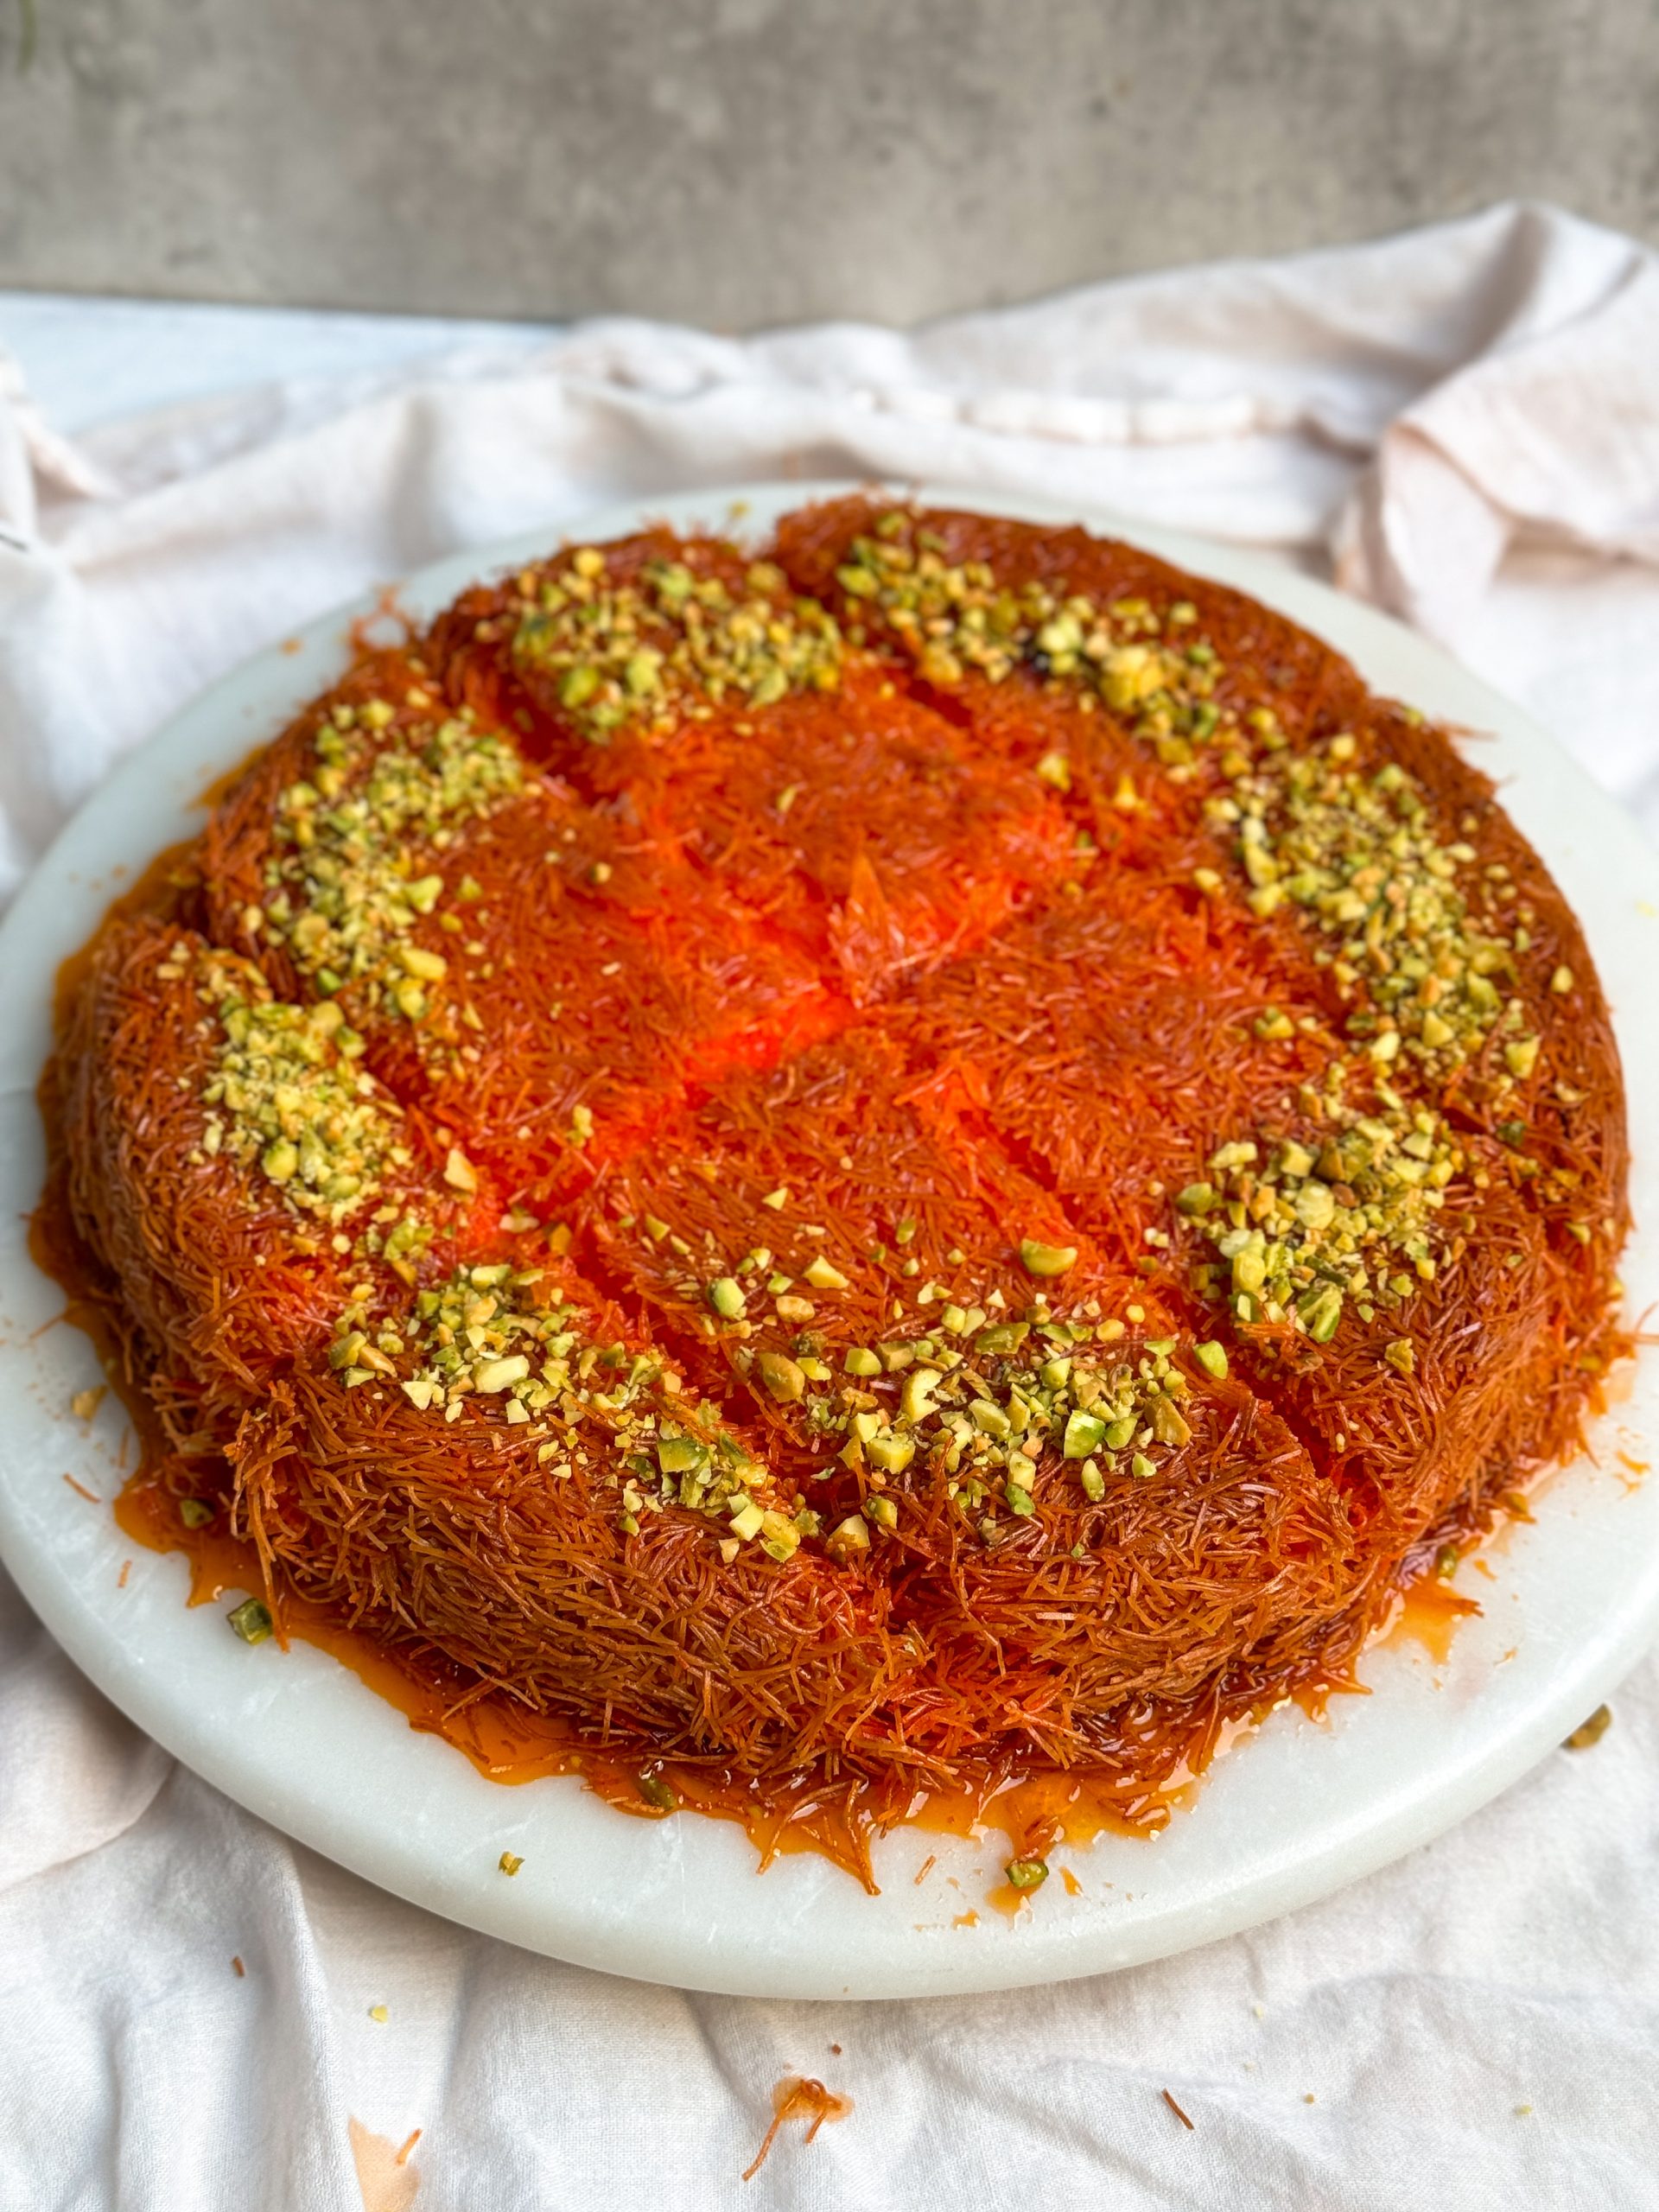 knafeh on a white marble serving board. knafeh has a crispy orange exterior, is soaked in syrup, decorated with chopped pistachios and cut into slices. picture at an angle